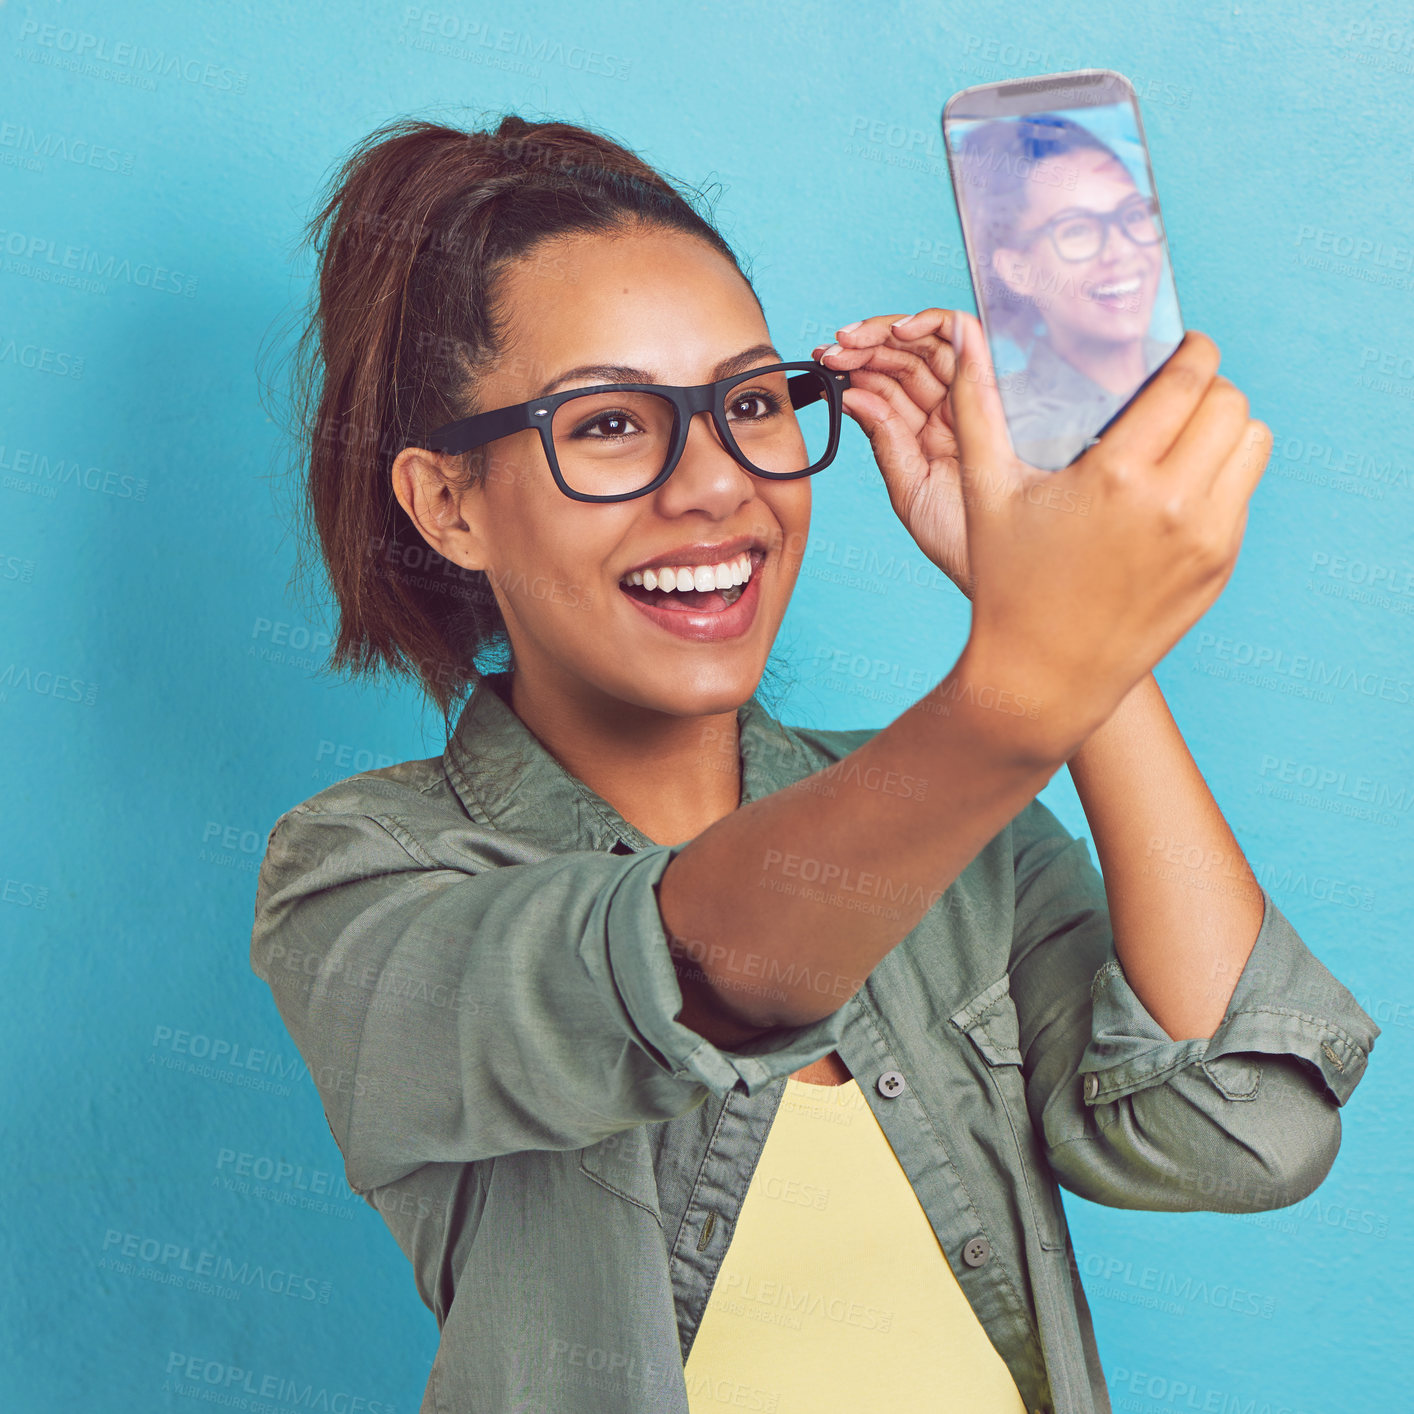 Buy stock photo Shot of a young woman taking a selfie against a blue background